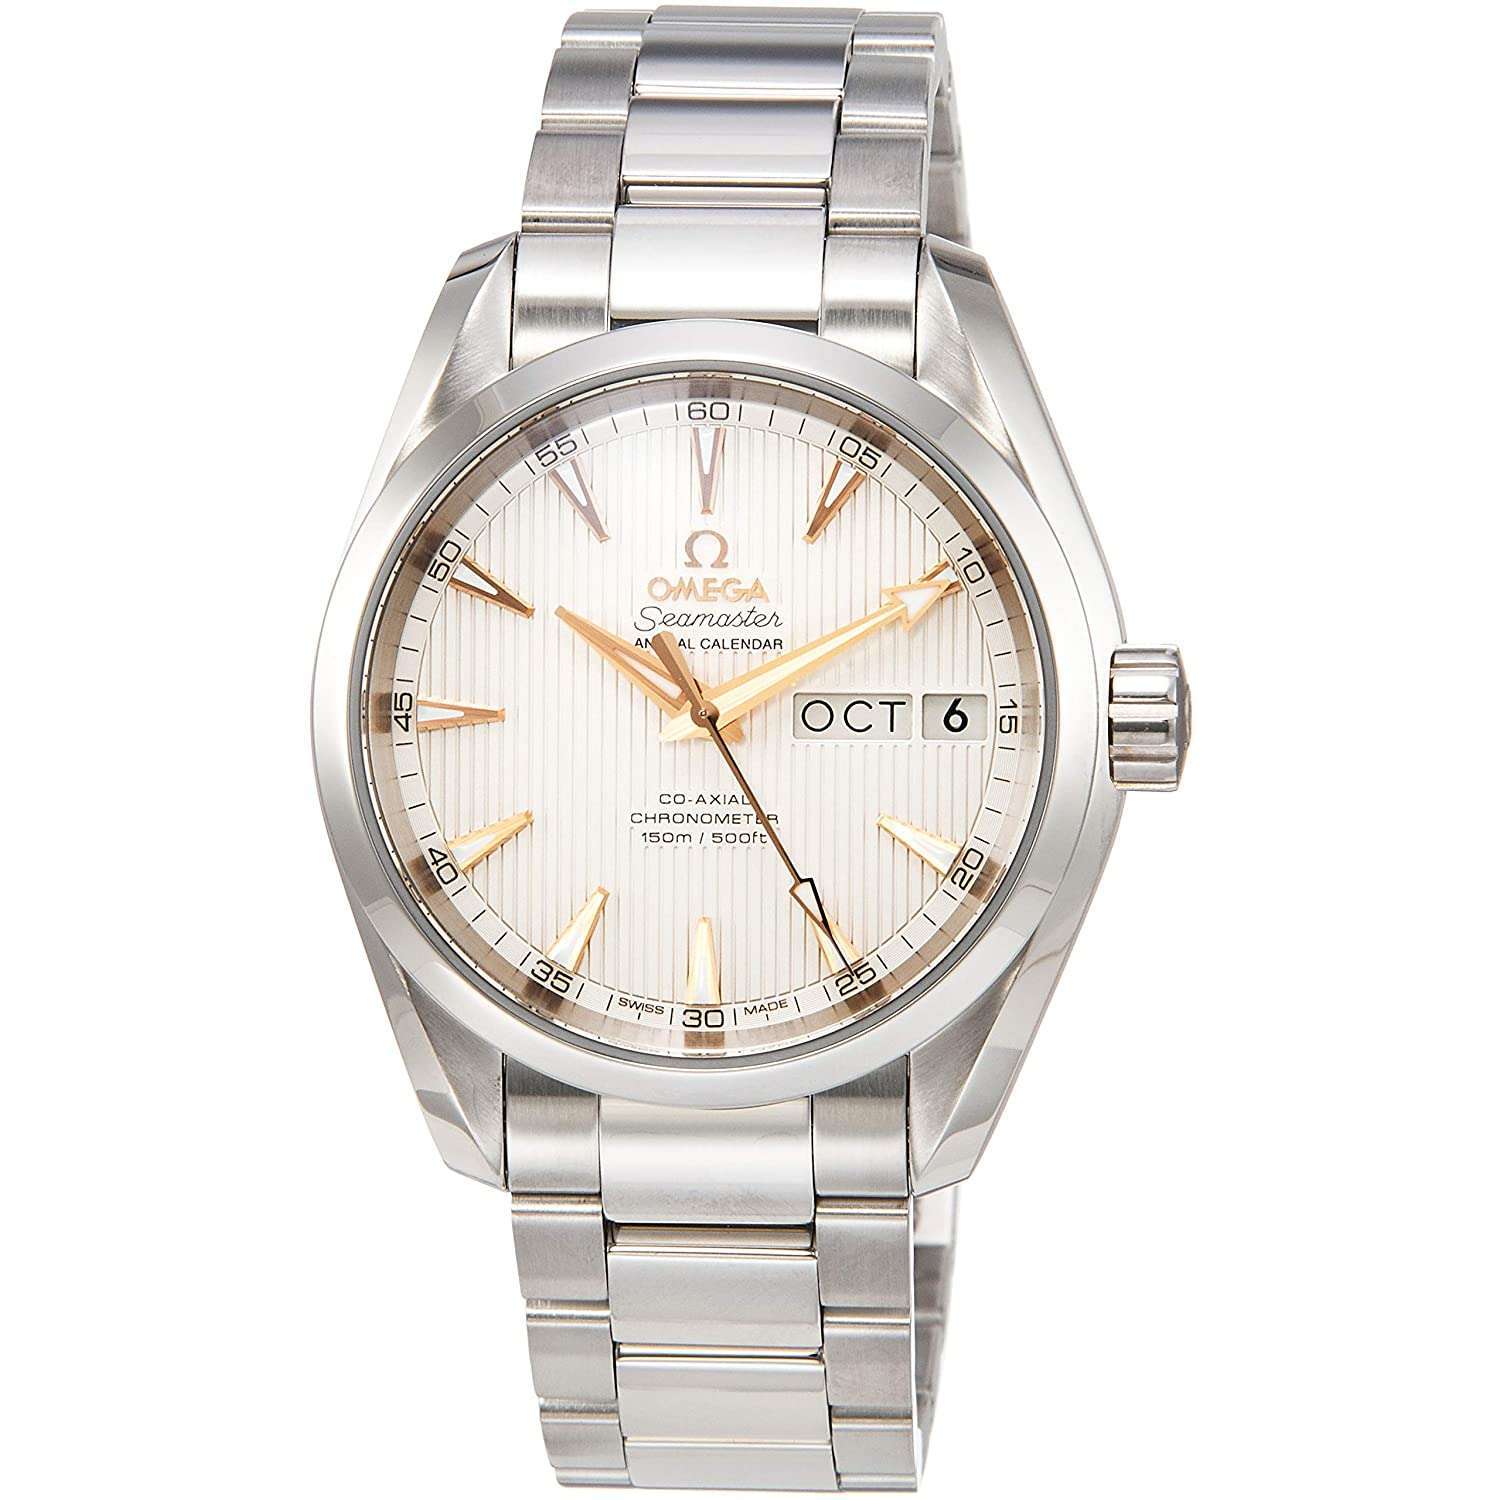 ROOK JAPAN:OMEGA SEAMASTER ANNUAL CALENDAR CO-AXIAL CHRONOMETER 37 MM MEN WATCH 231.10.39.22.02.001,Luxury Watch,Omega